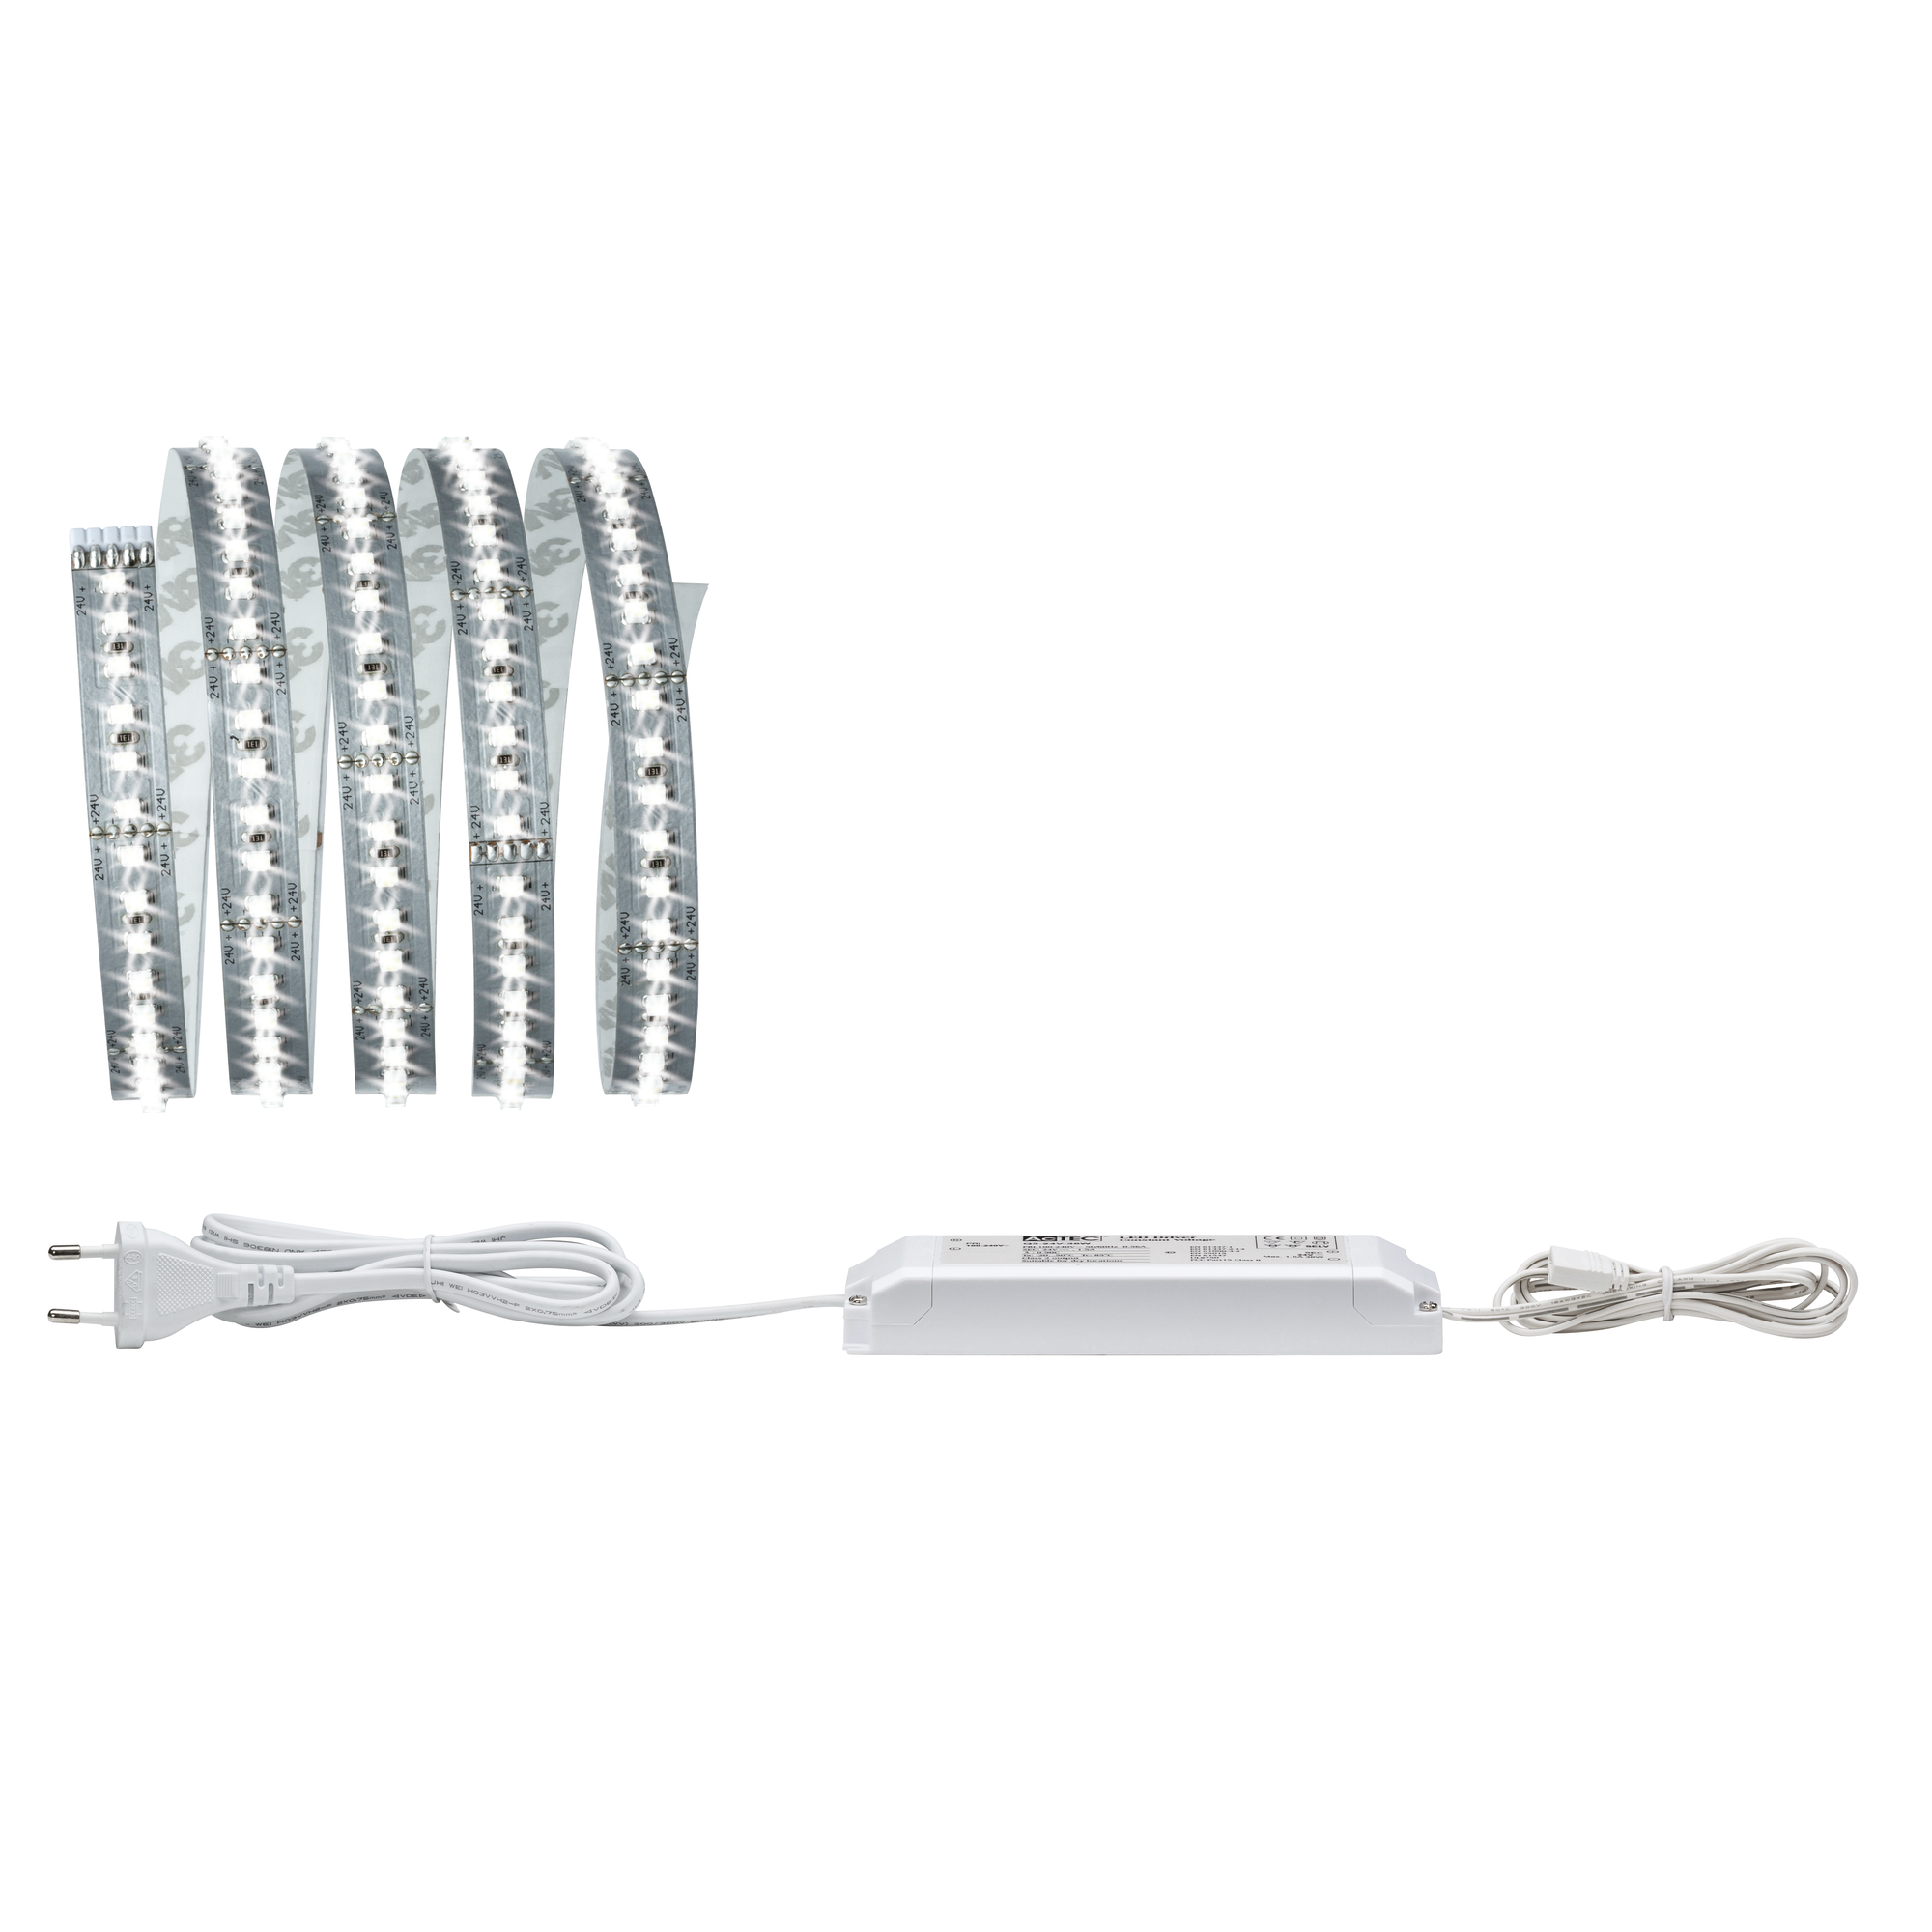 Function MaxLED 1000 Basisset 1,5 m Tageslichtweiß 17 W 230/24 V 36 VA Silber + product picture